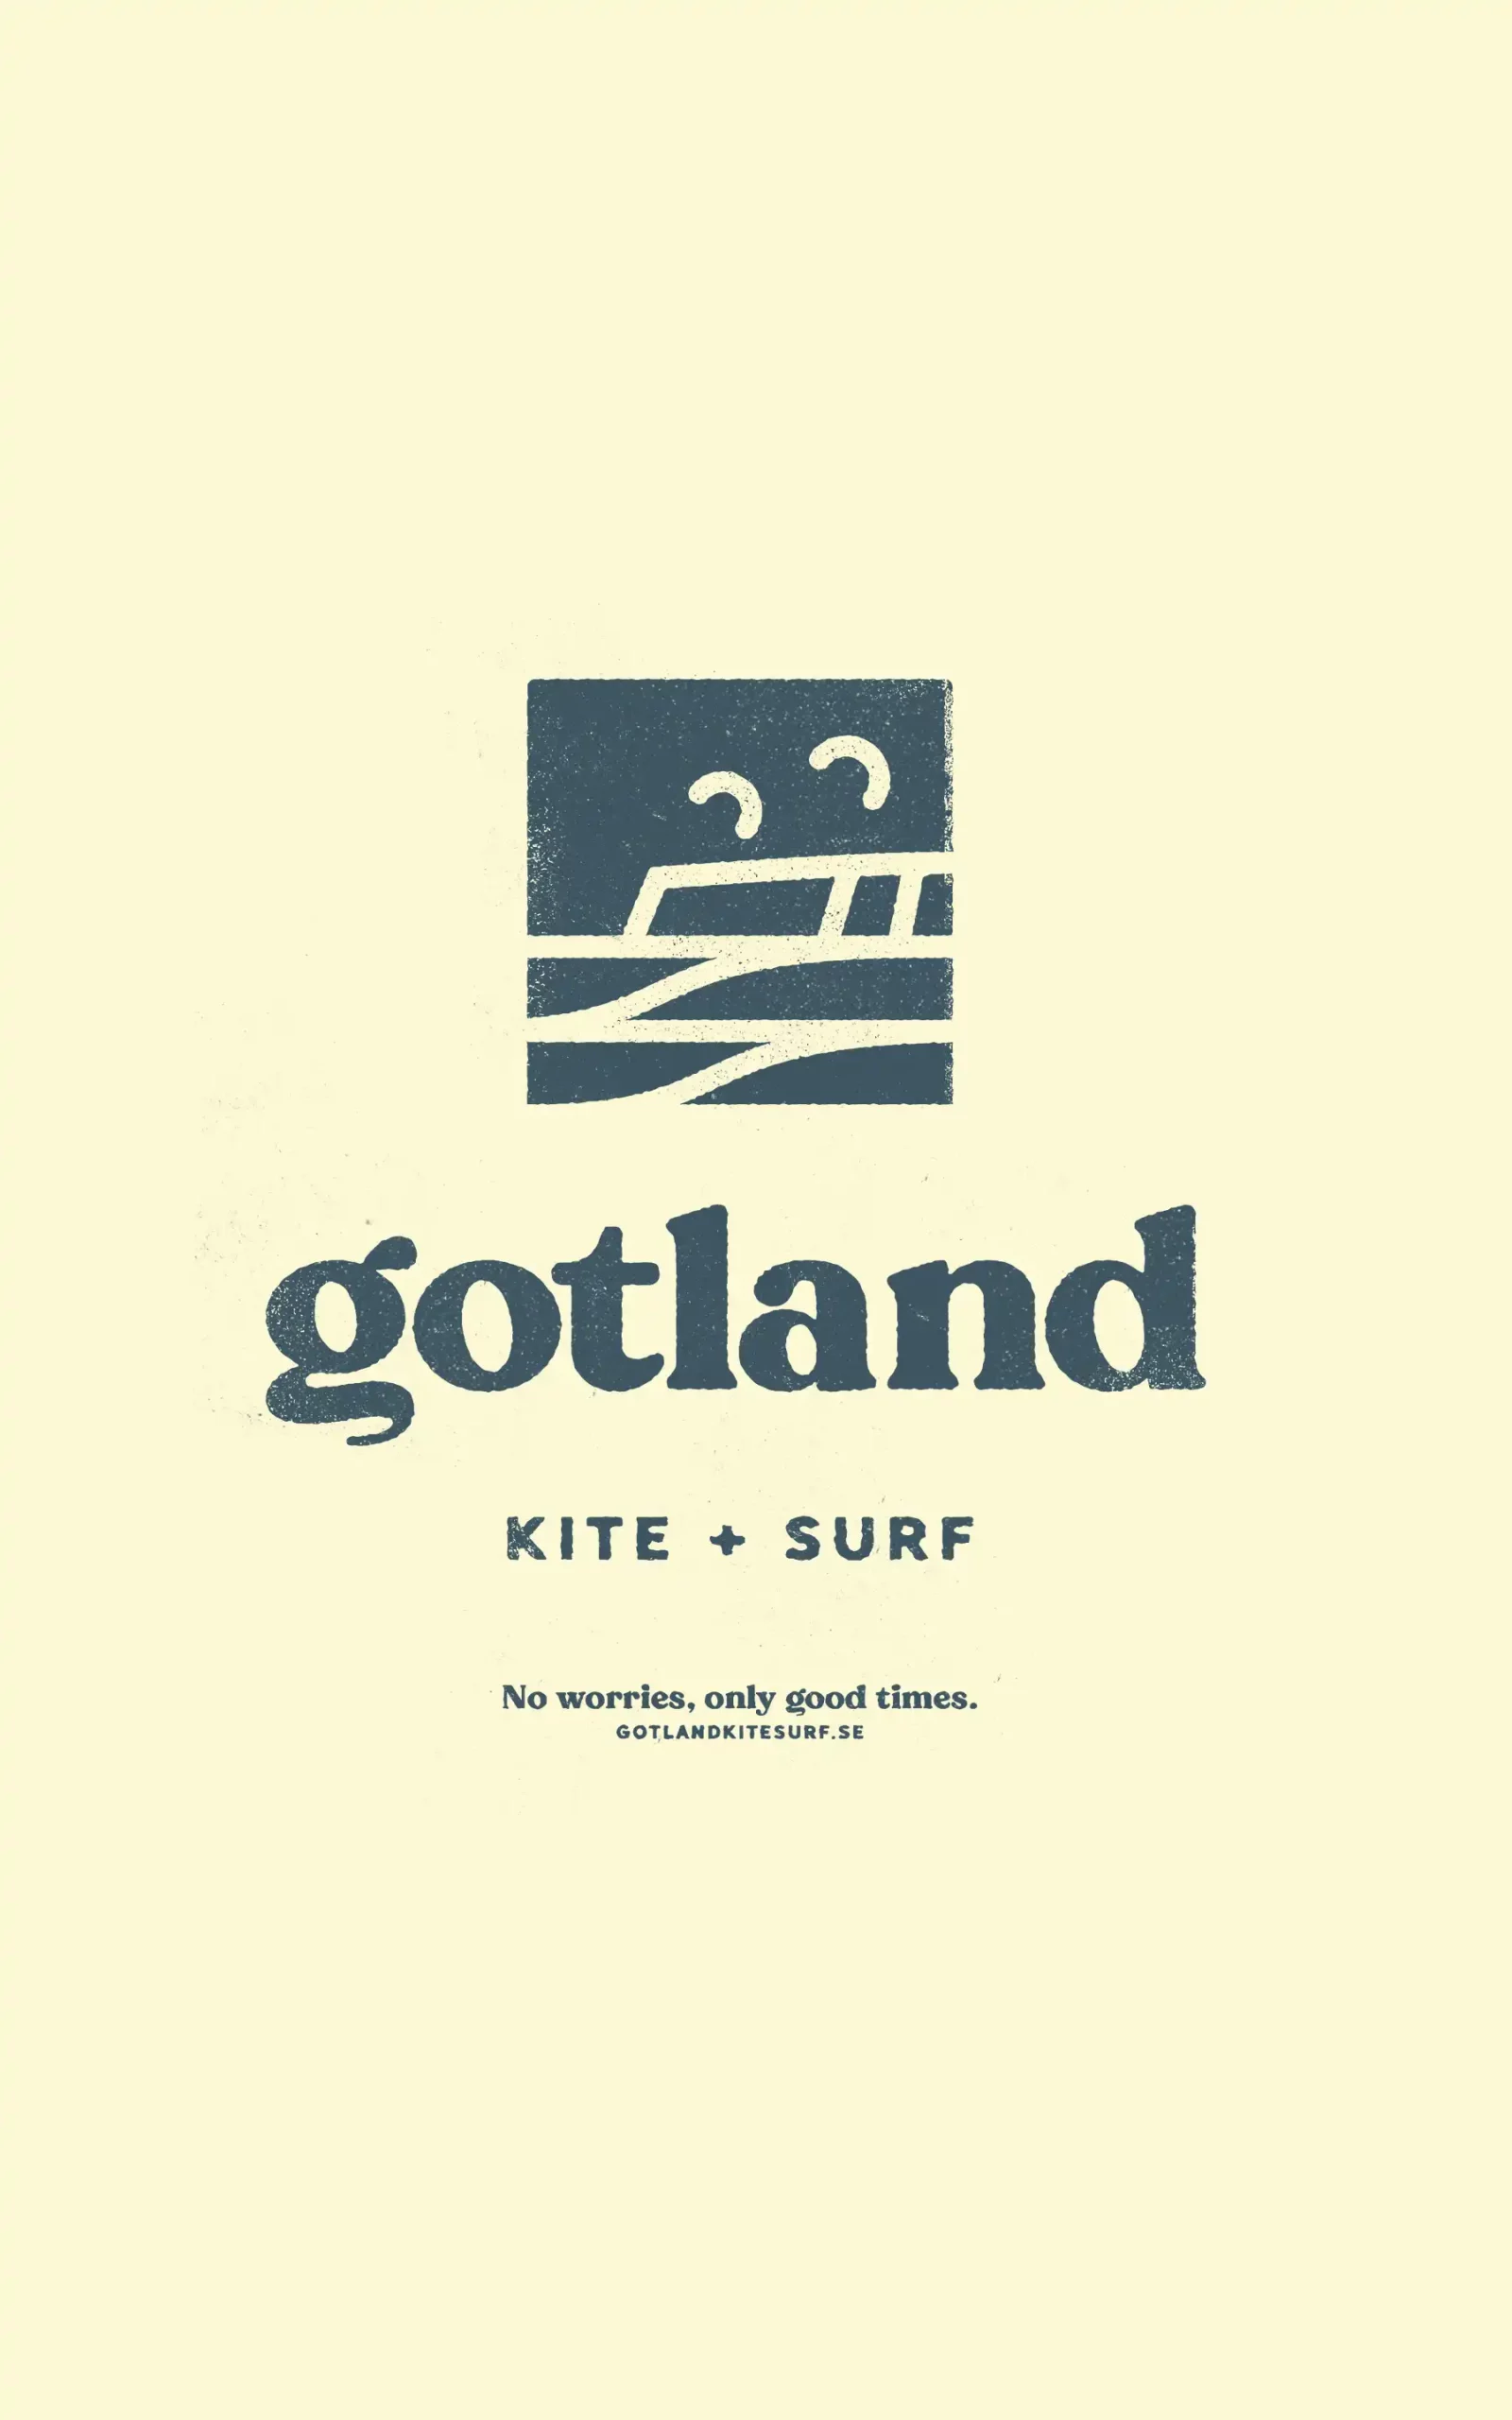 Logo Design for the gotland based kiteboarding school, Gotland Kite and Surf. The logo consiss of a typical gotland sea cliff in the background, and 2 kites overhead. In the foreground there are 2 perfect waves.